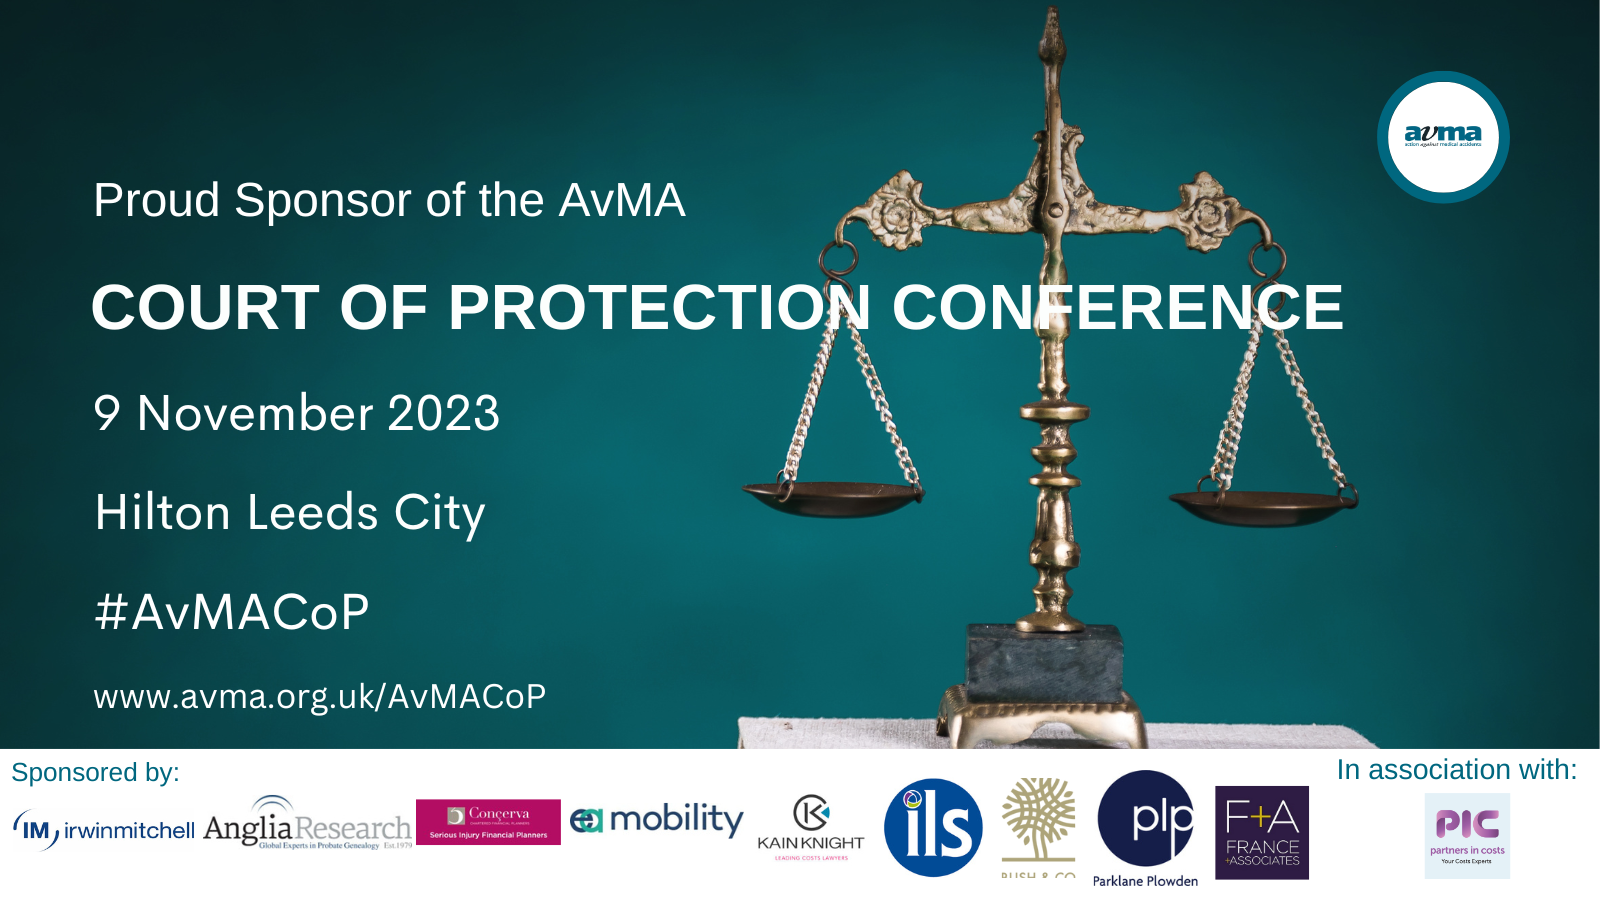 Parklane Plowden Sponsor the AvMA Court of Protection Conference